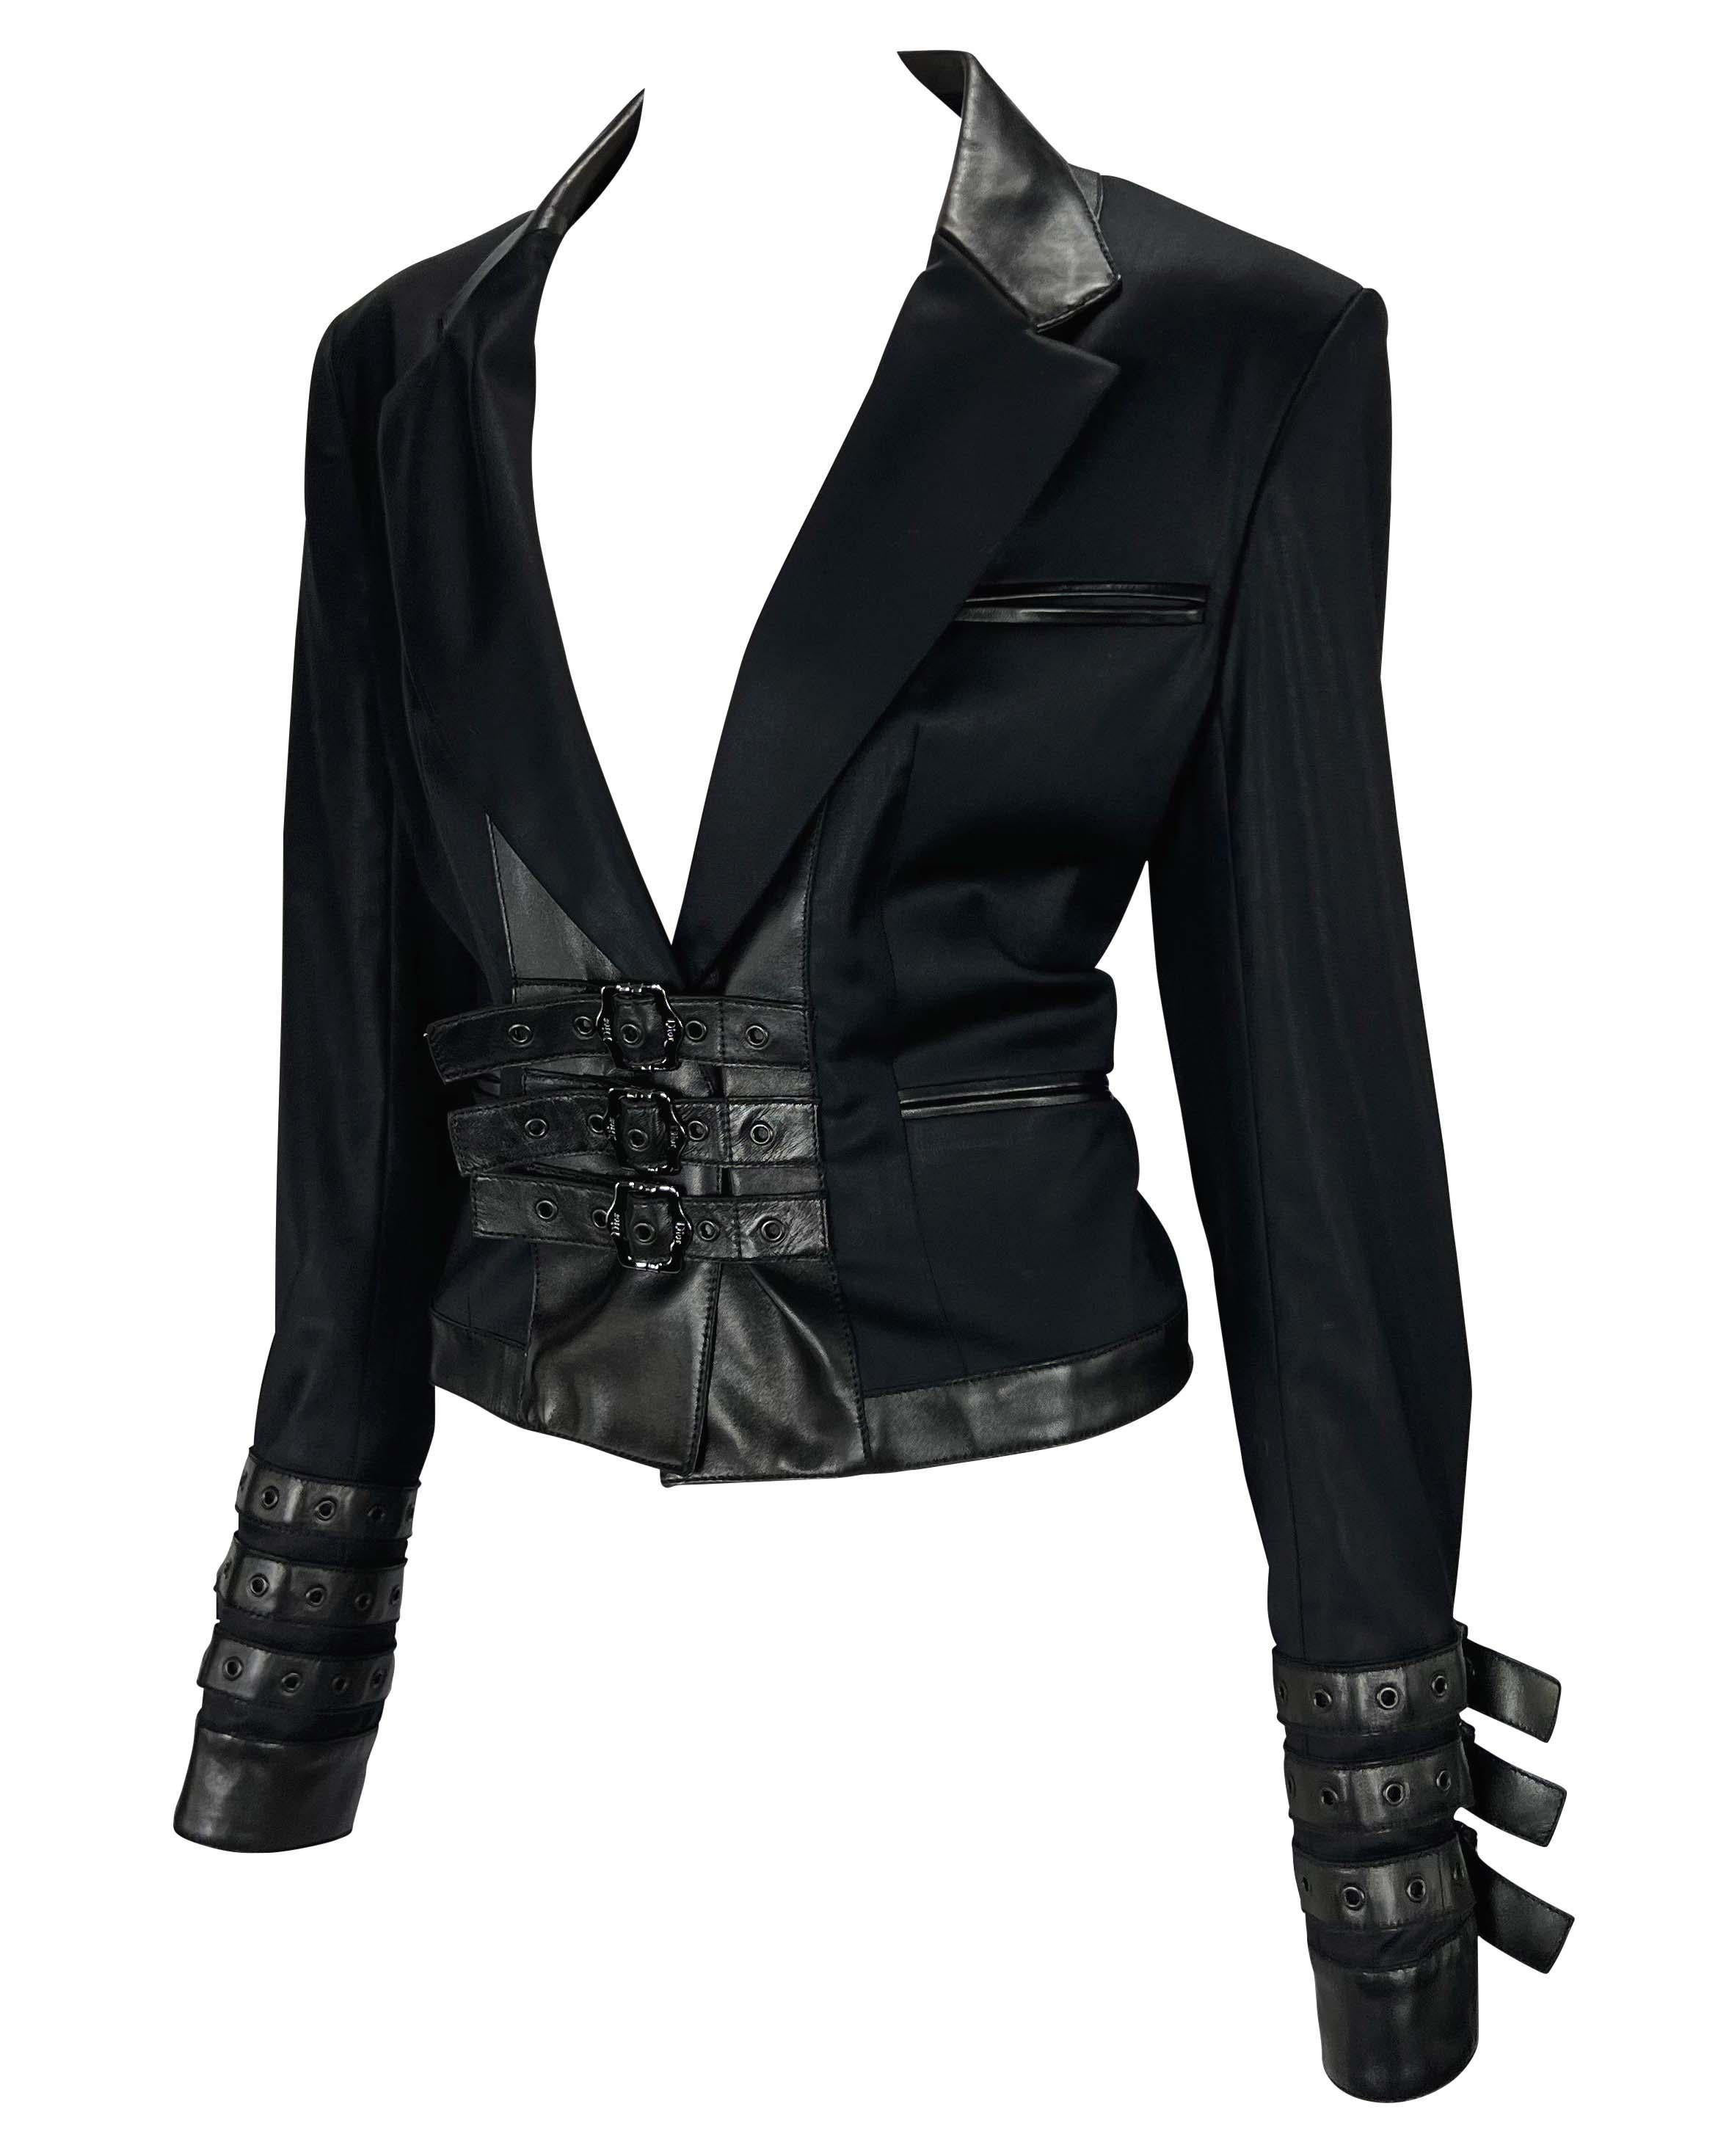 TheRealList presents: a black leather accented Christian Dior Boutique buckle blazer, designed by John Galliano. From the Fall/Winter 2003 collection, this bondage-inspired blazer features a plunging v-neckline, pockets at the bust and hips, and a